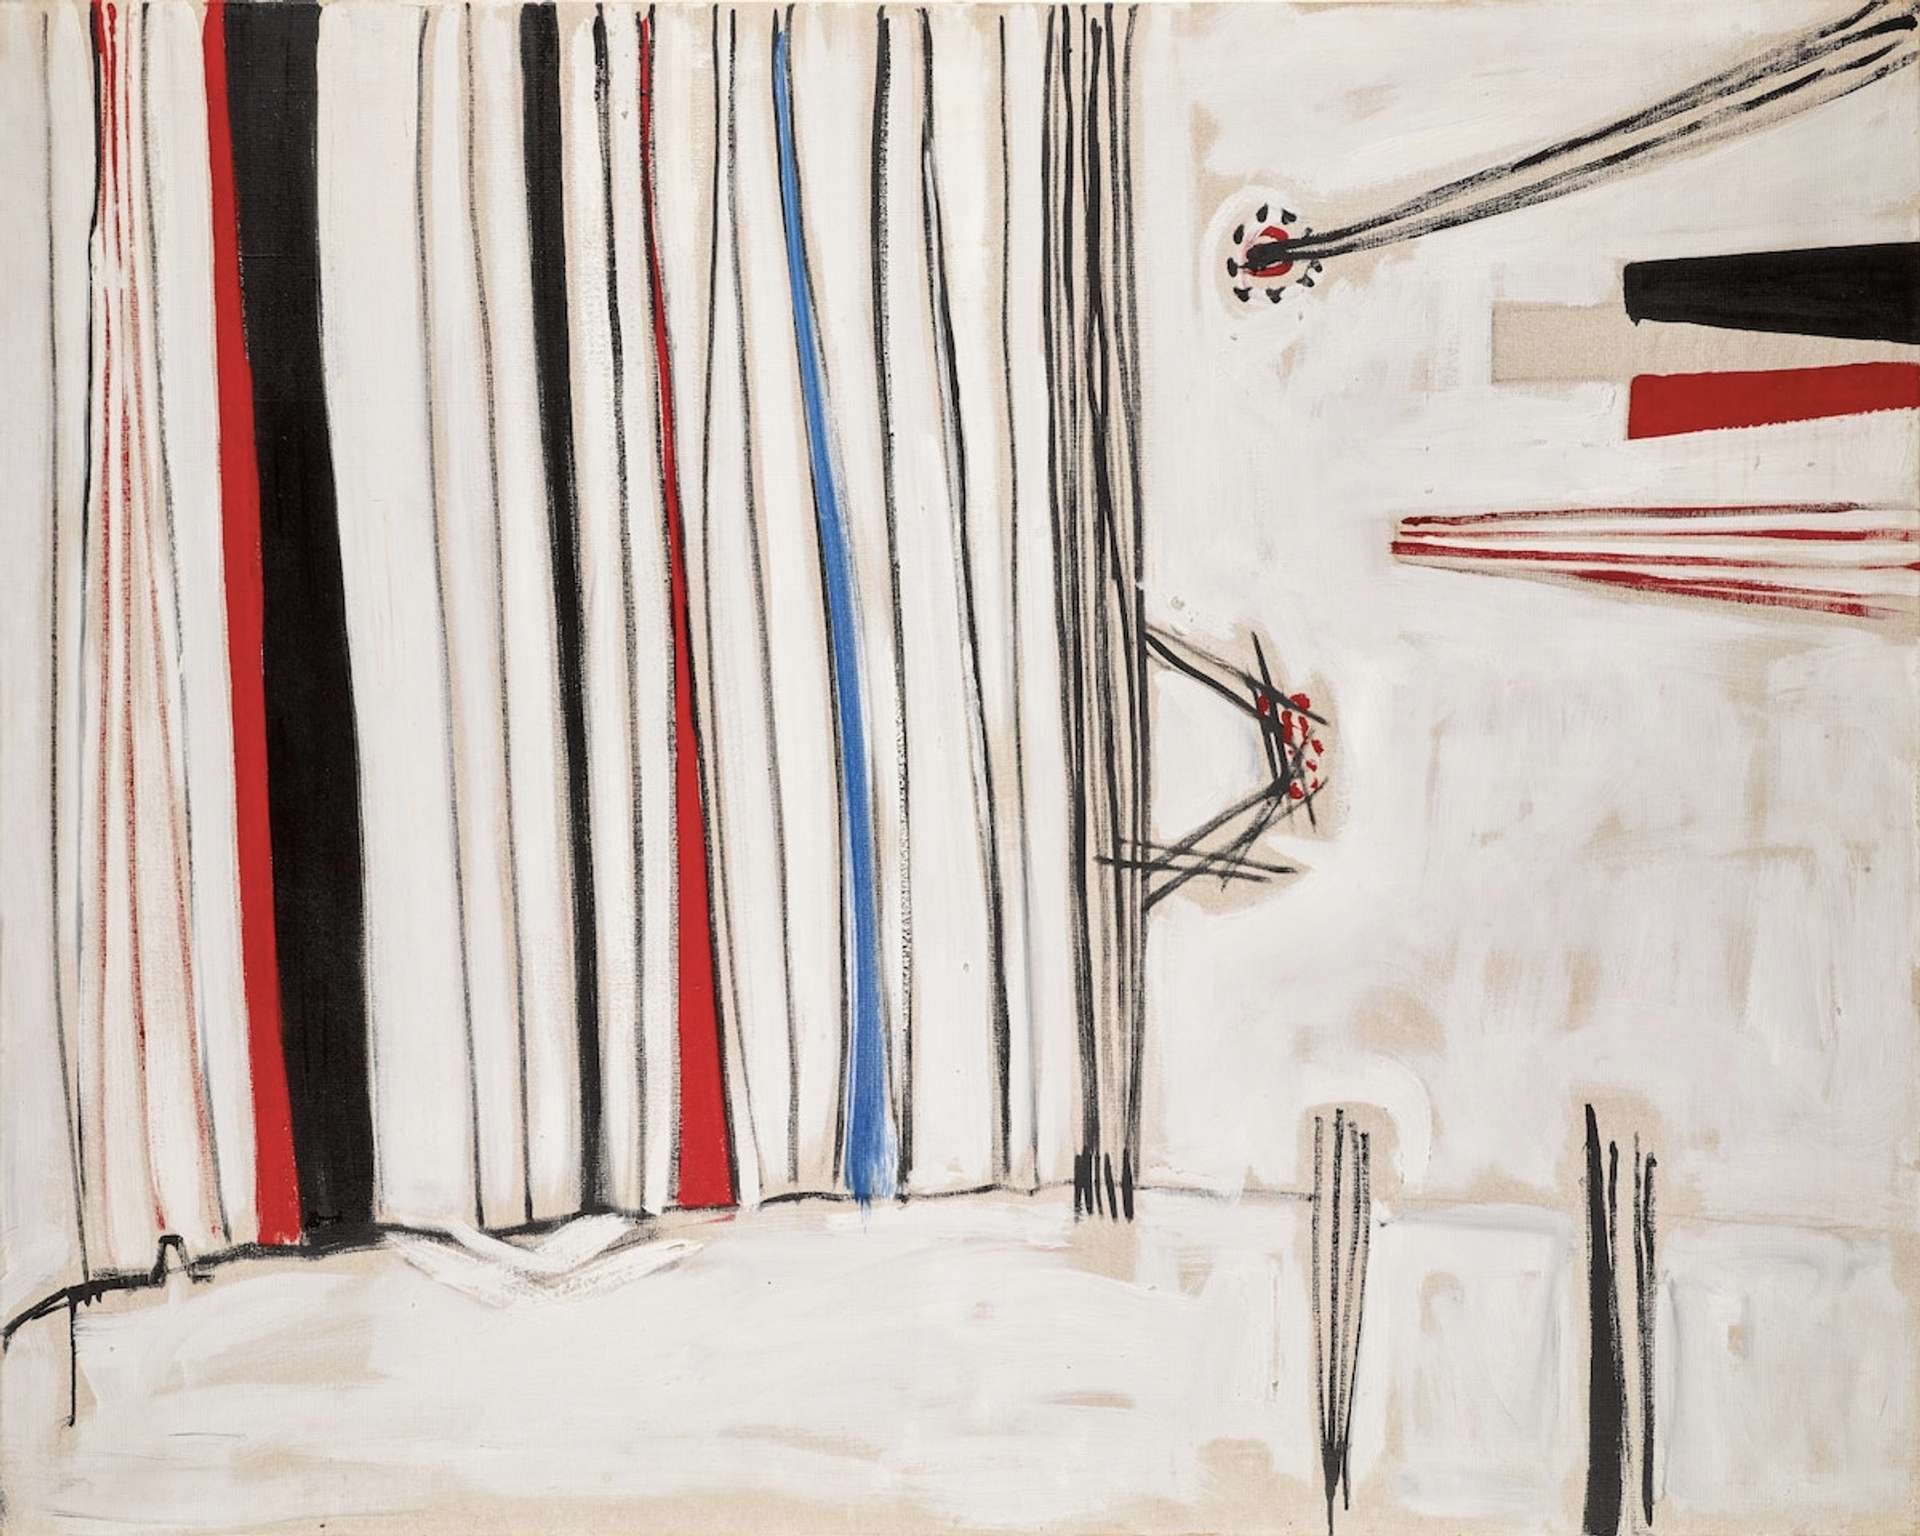  An abstract painting with thin vertical lines starting from the left edge of the canvas. Black, red, and blue filled-in spaces create accentuated areas that extend towards the centre of the canvas. The remaining L-shaped section of the canvas features washed white paint and various horizontal lines.